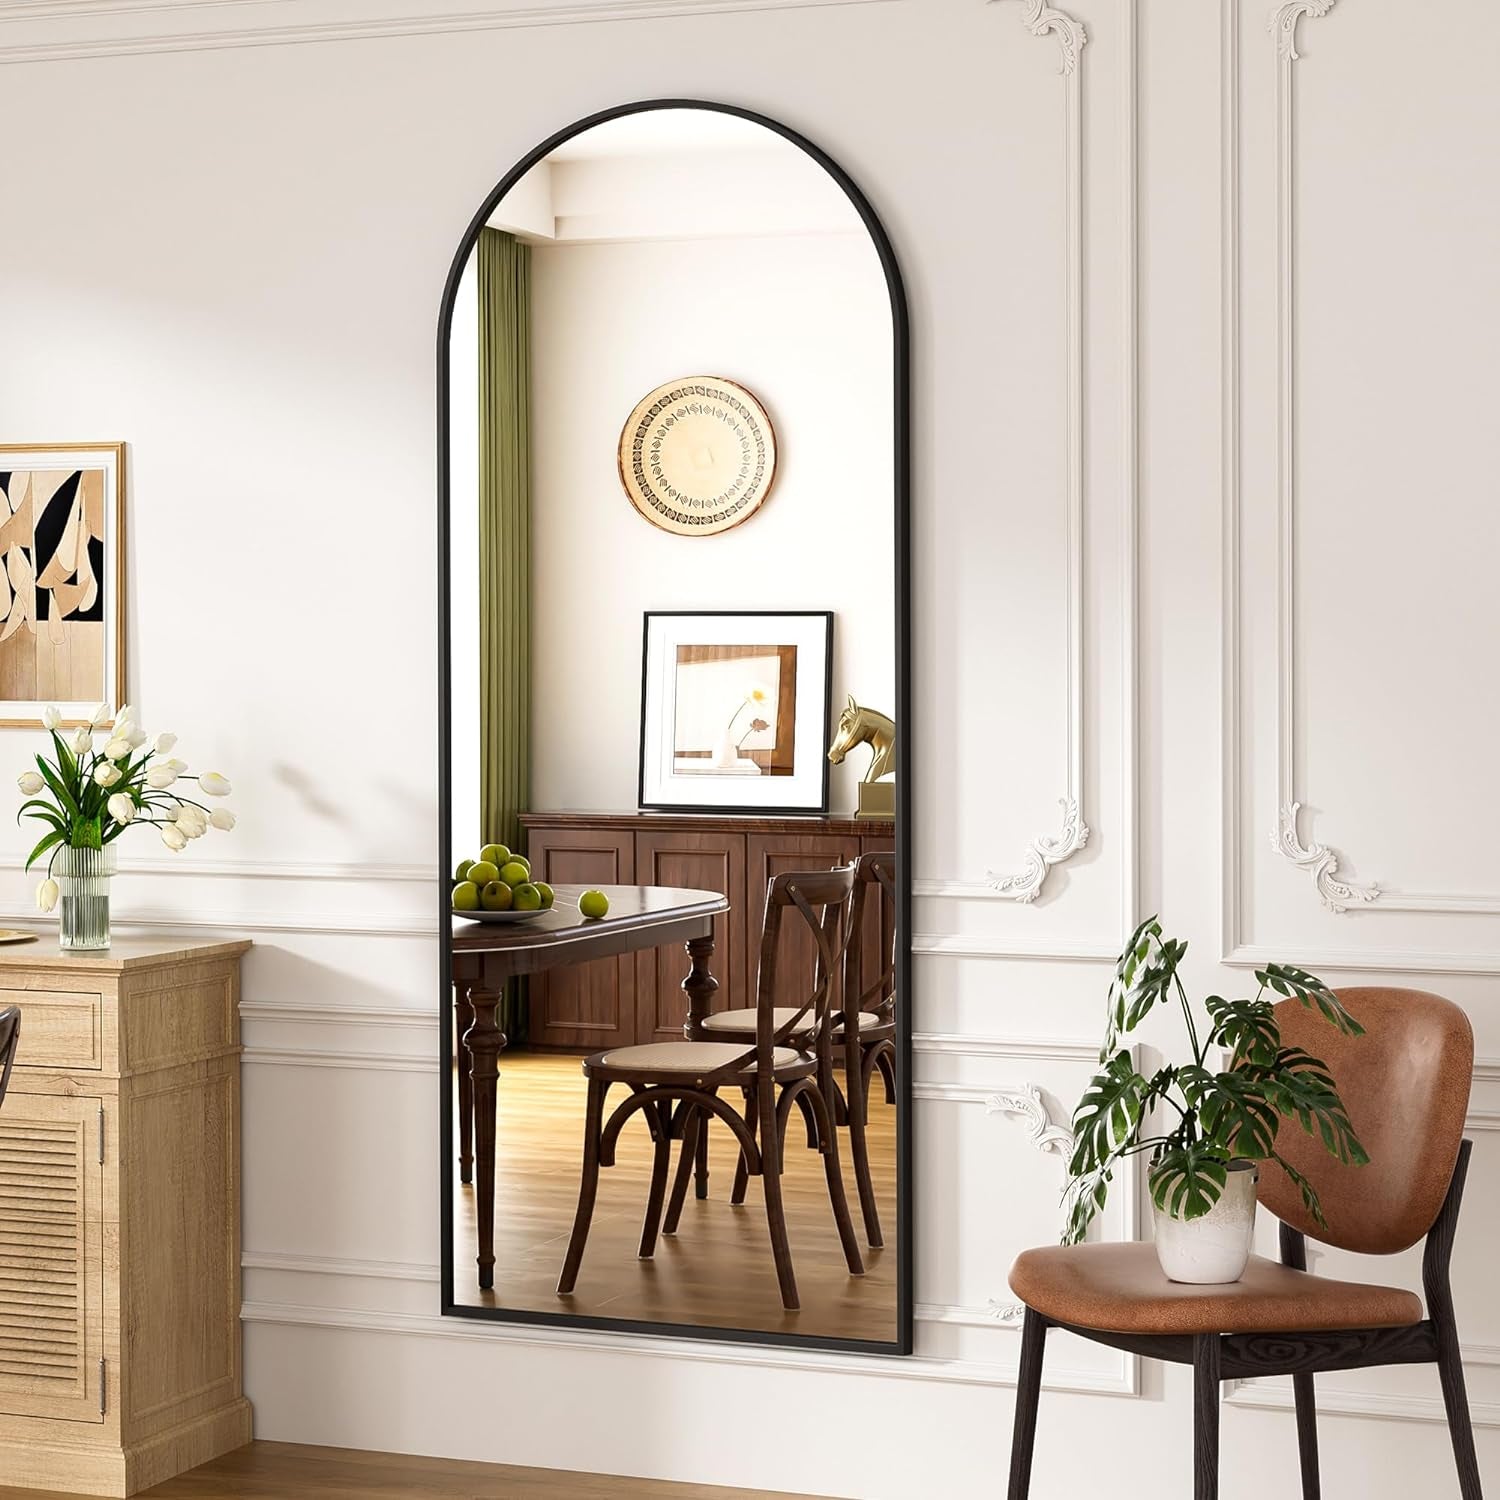 Full Length Mirror, 71"X30" Arched Floor Length Mirror, Oversized Standing Mirror, Hanging or Leaning against Wall Mounted Mirror, Large Full Body Mirror with Aluminum Frame for Bedroom (Black) - Design By Technique